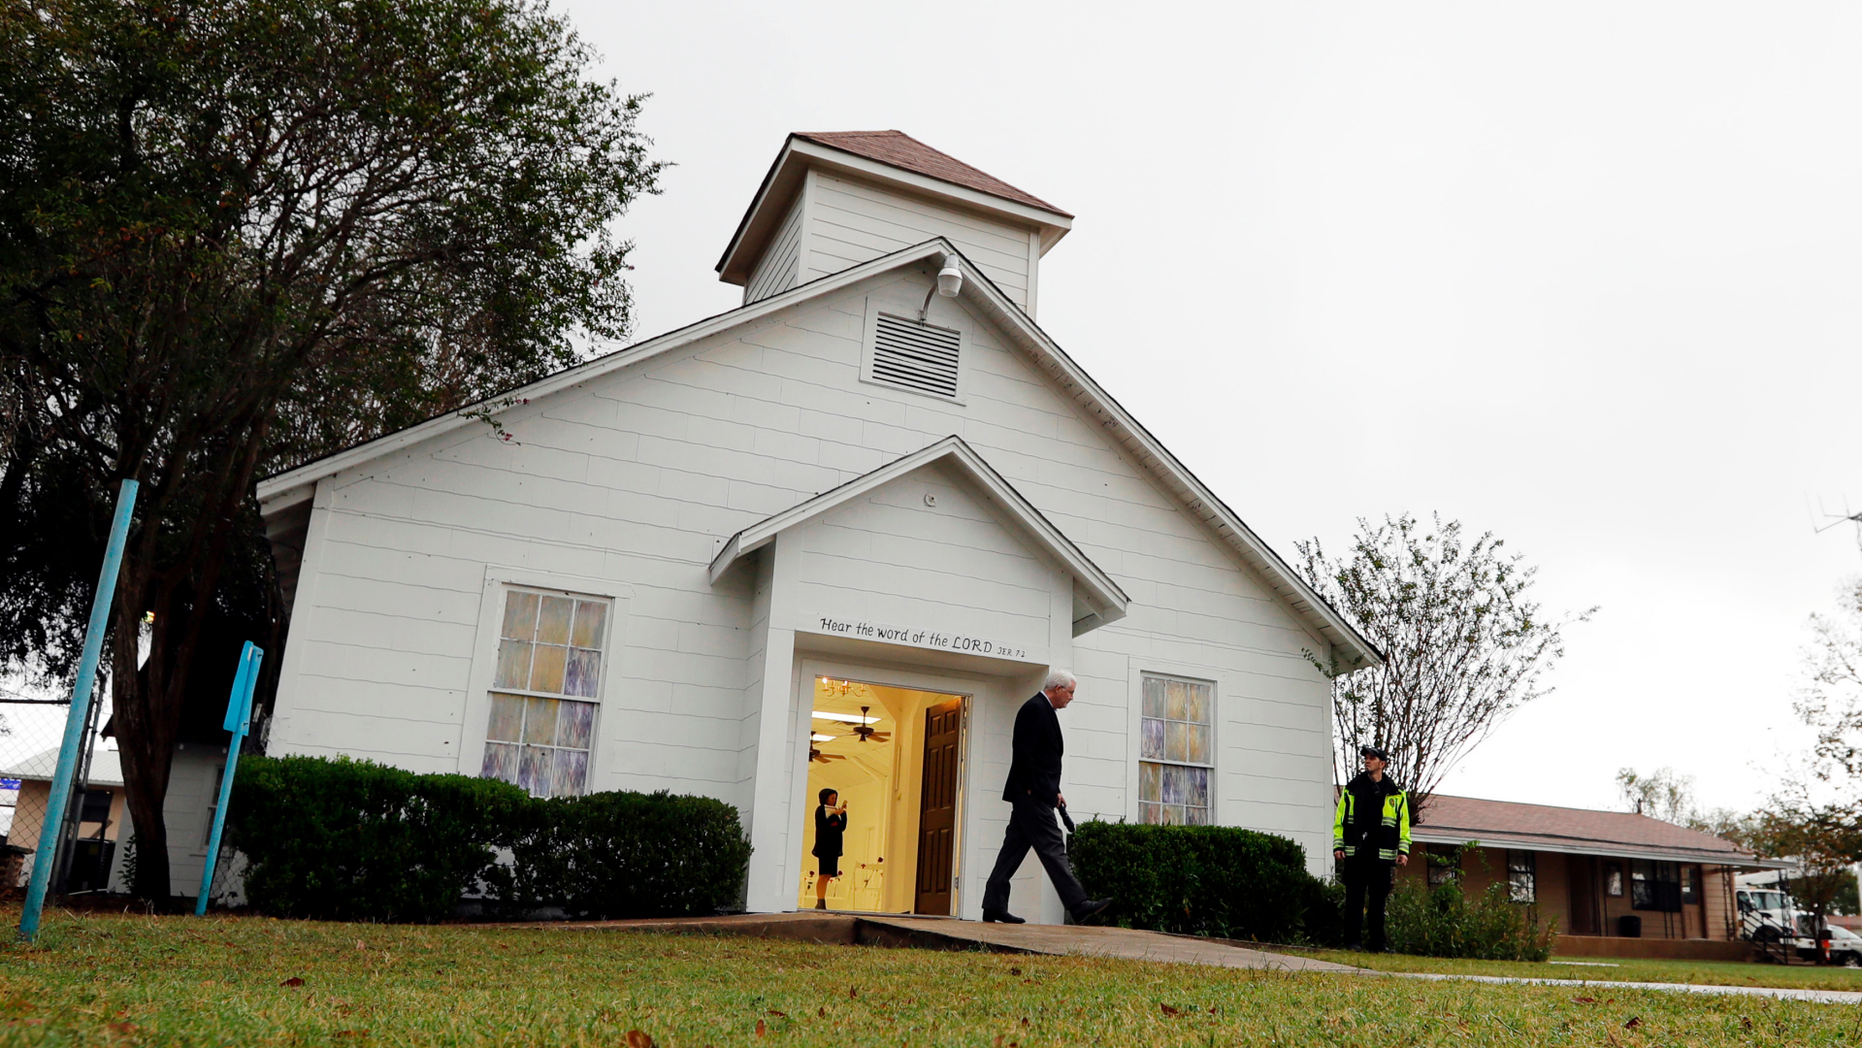 DOSSIER - In this photo of November 12, 2017, a man leaves the monument to the victims of a shooting at the First Baptist Church in Sutherland Springs, Sutherland Springs, Texas. A South Texas church where an armed gunman opened fire in 2017 and killed more than two dozen worshipers will unveil a new sanctuary and commemorative hall honoring the victims. Relatives and relatives of those who died or were injured at the Sutherland Springs Baptist Church are expected to gather at the newly built church on Sunday, May 19, 2019. (AP photo / Eric Gay, File)